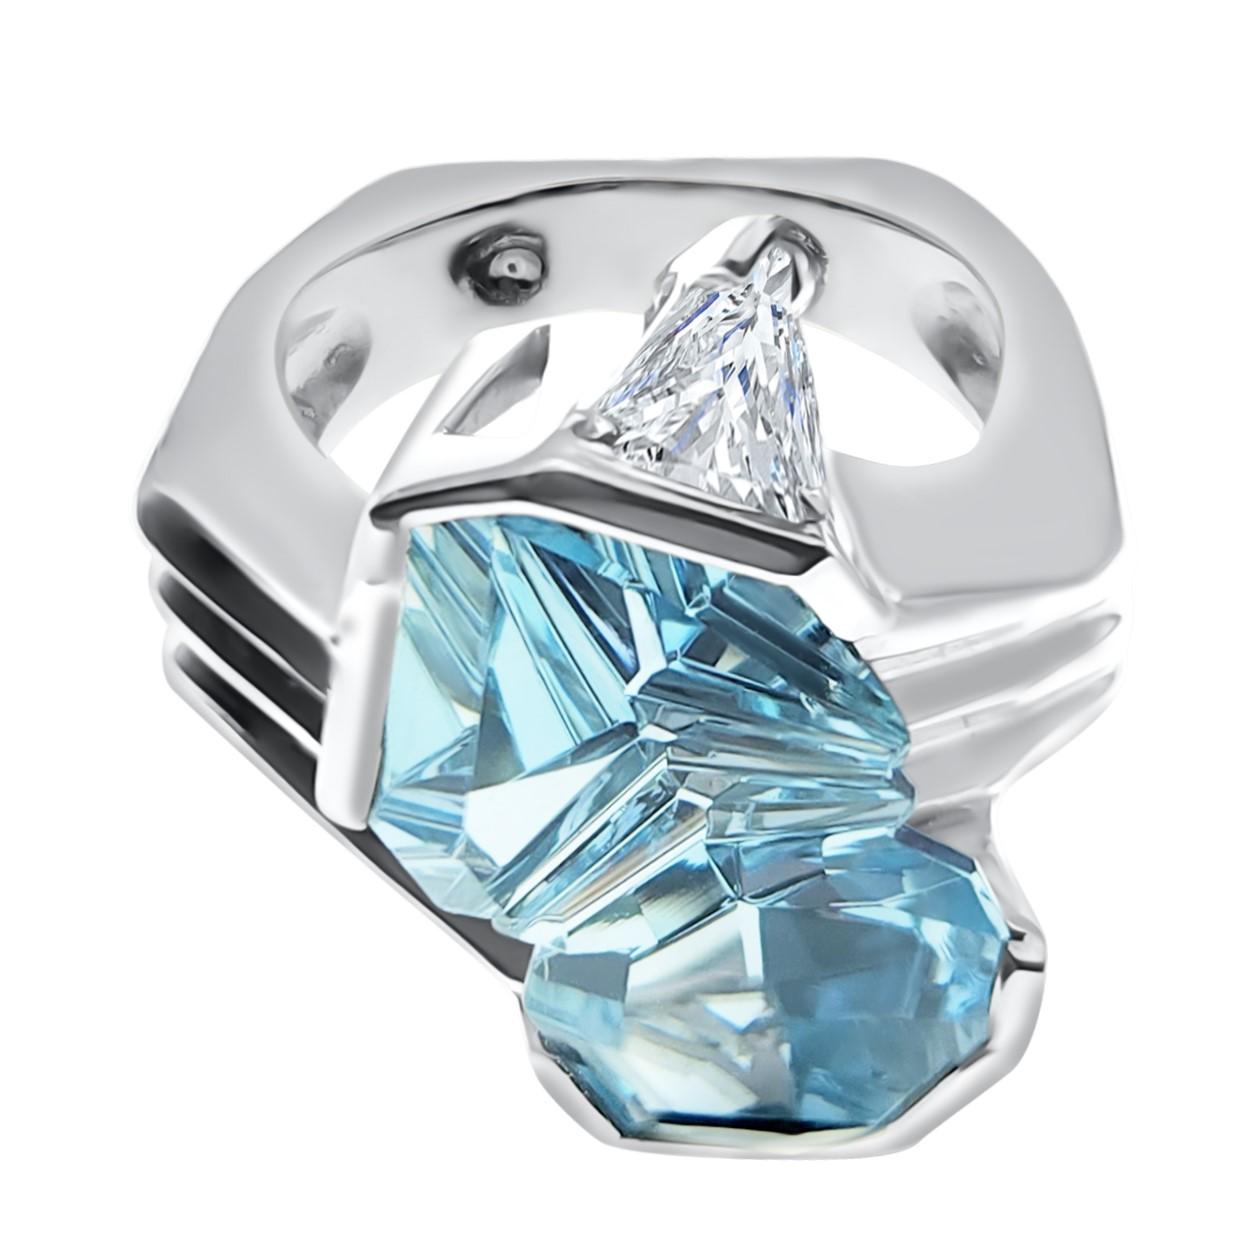 This angular designed, hand carved from lost wax ring contains a 7.61 carat fantasy cut aquamarine signed by world famous gem cutter, Bernd Munsteiner. American goldsmith Martha Richter purchased this gem quality aquamarine from Bernd Munsteiner in